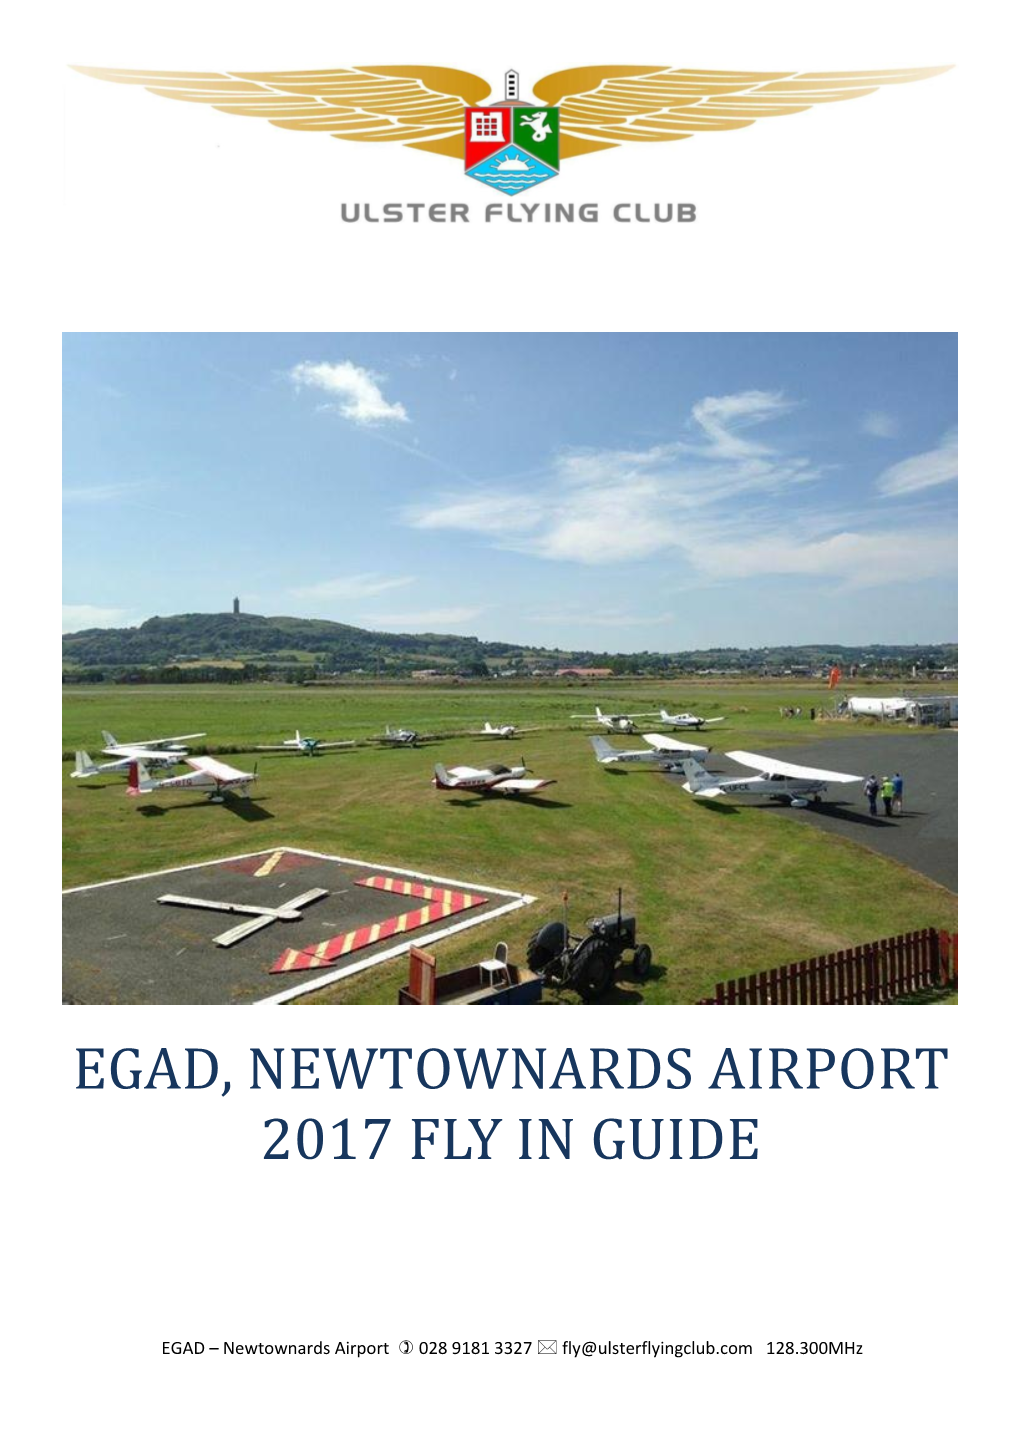 Egad, Newtownards Airport 2017 Fly in Guide